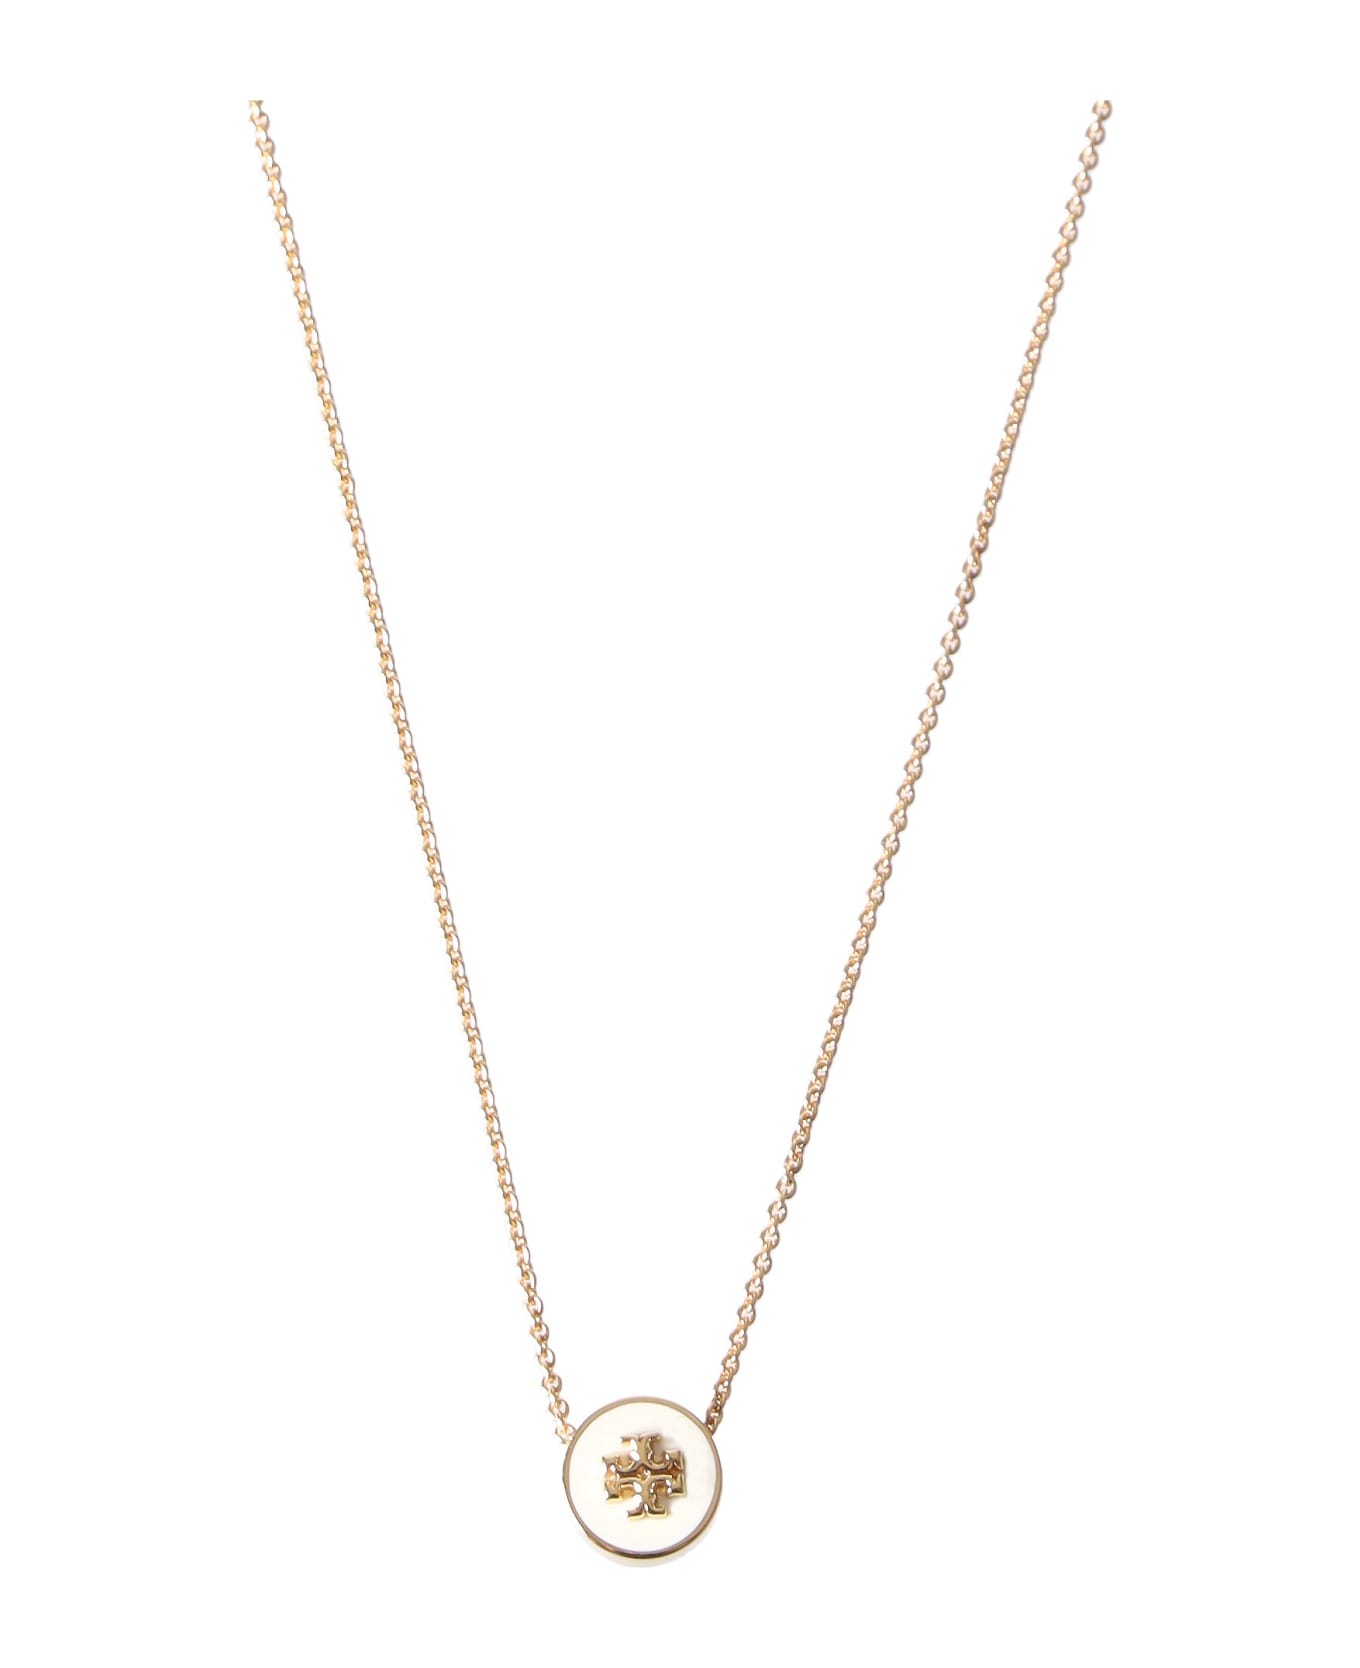 Tory Burch Necklace With Logo Pendant - Gold ネックレス